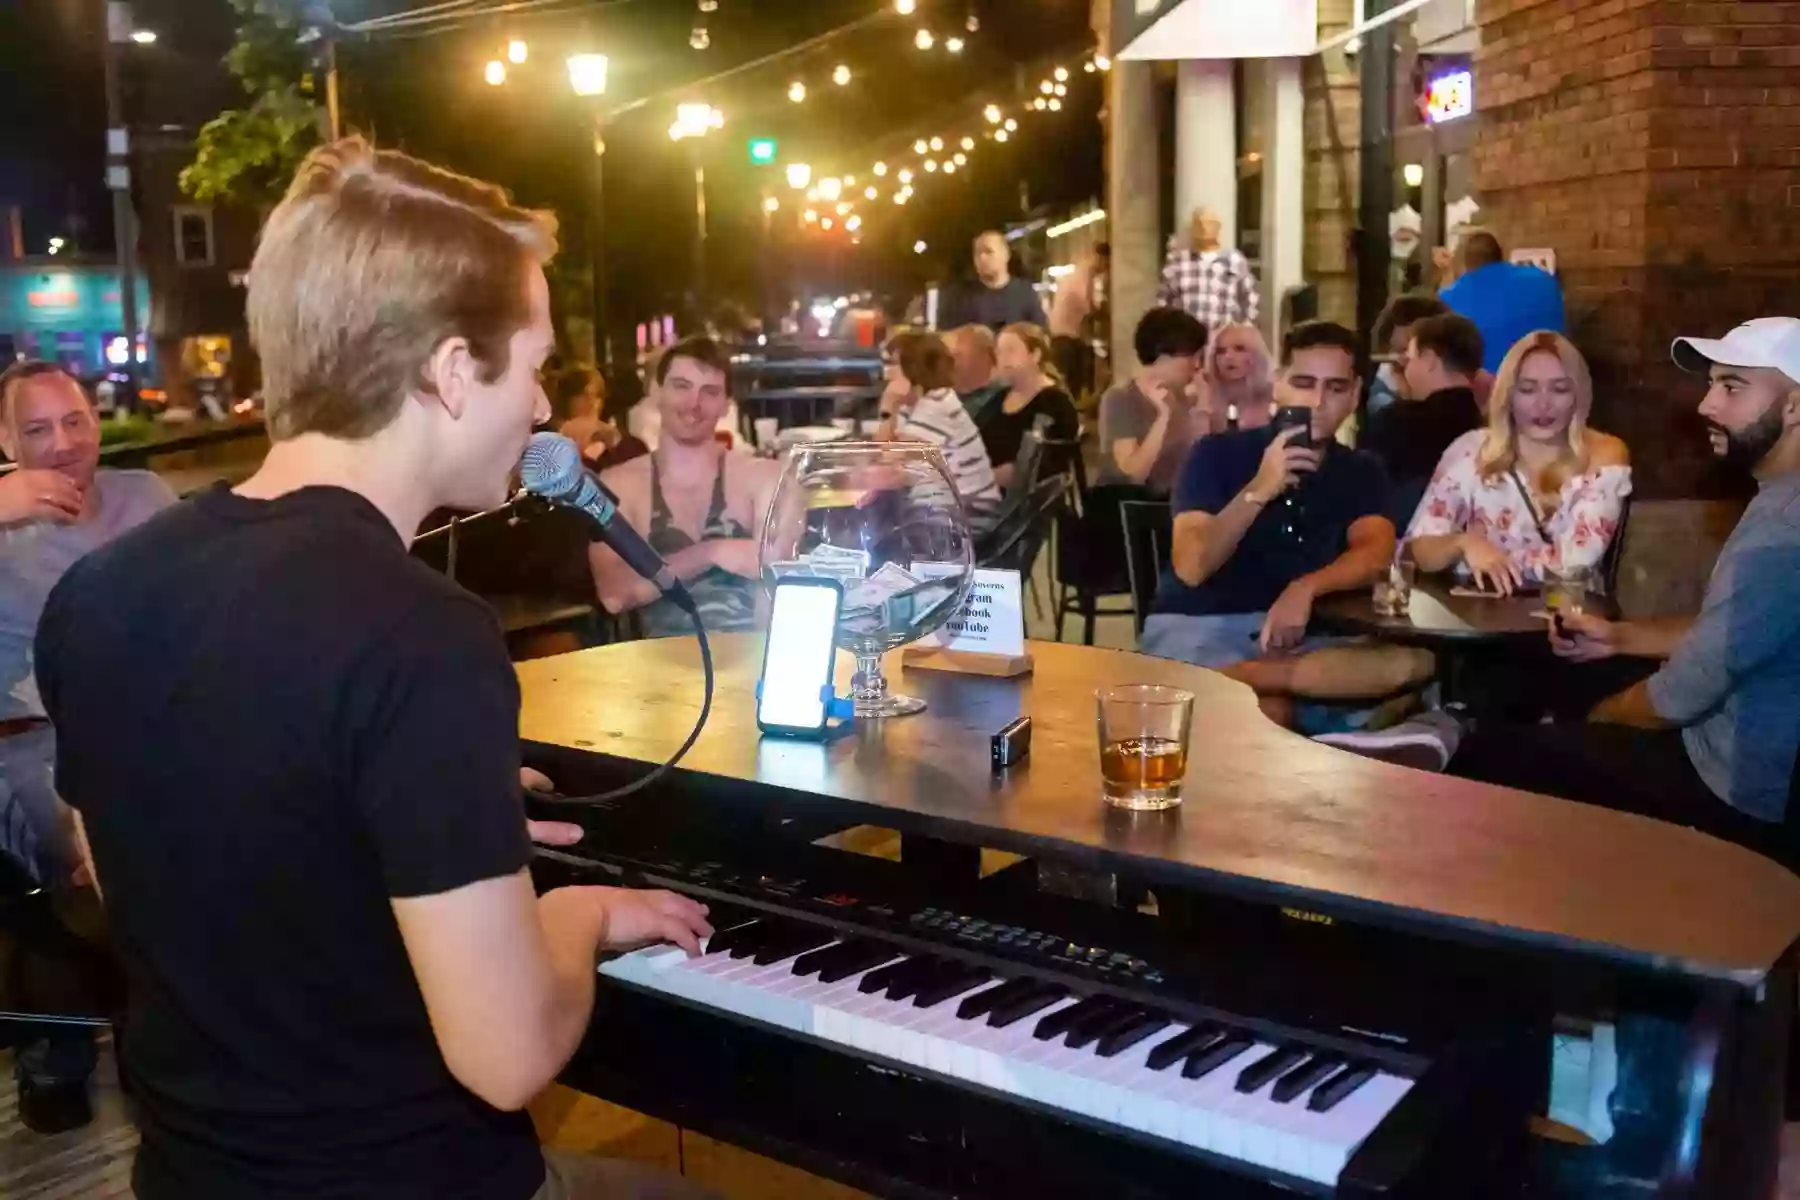 Brick House Dueling Pianos